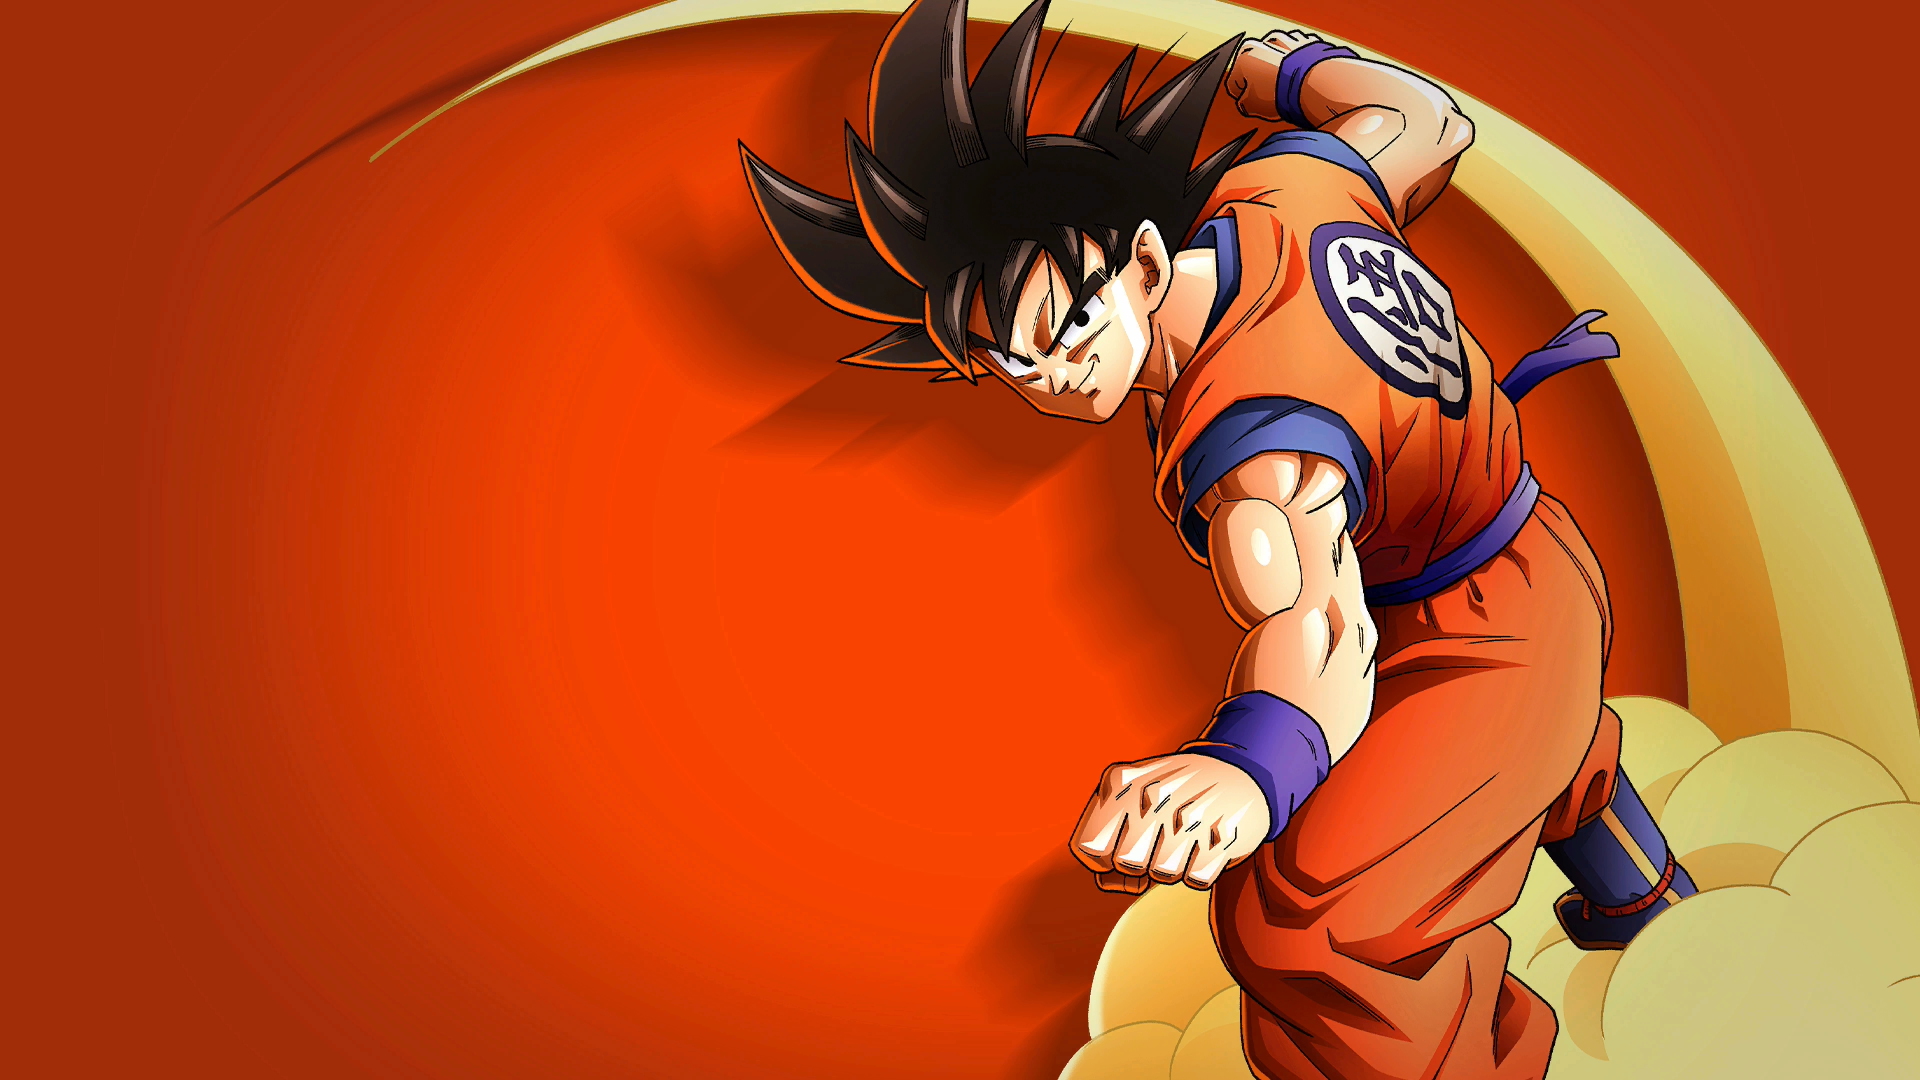 Dragon Ball Z: The Board Game Saga will let you play the anime series from  start to finish